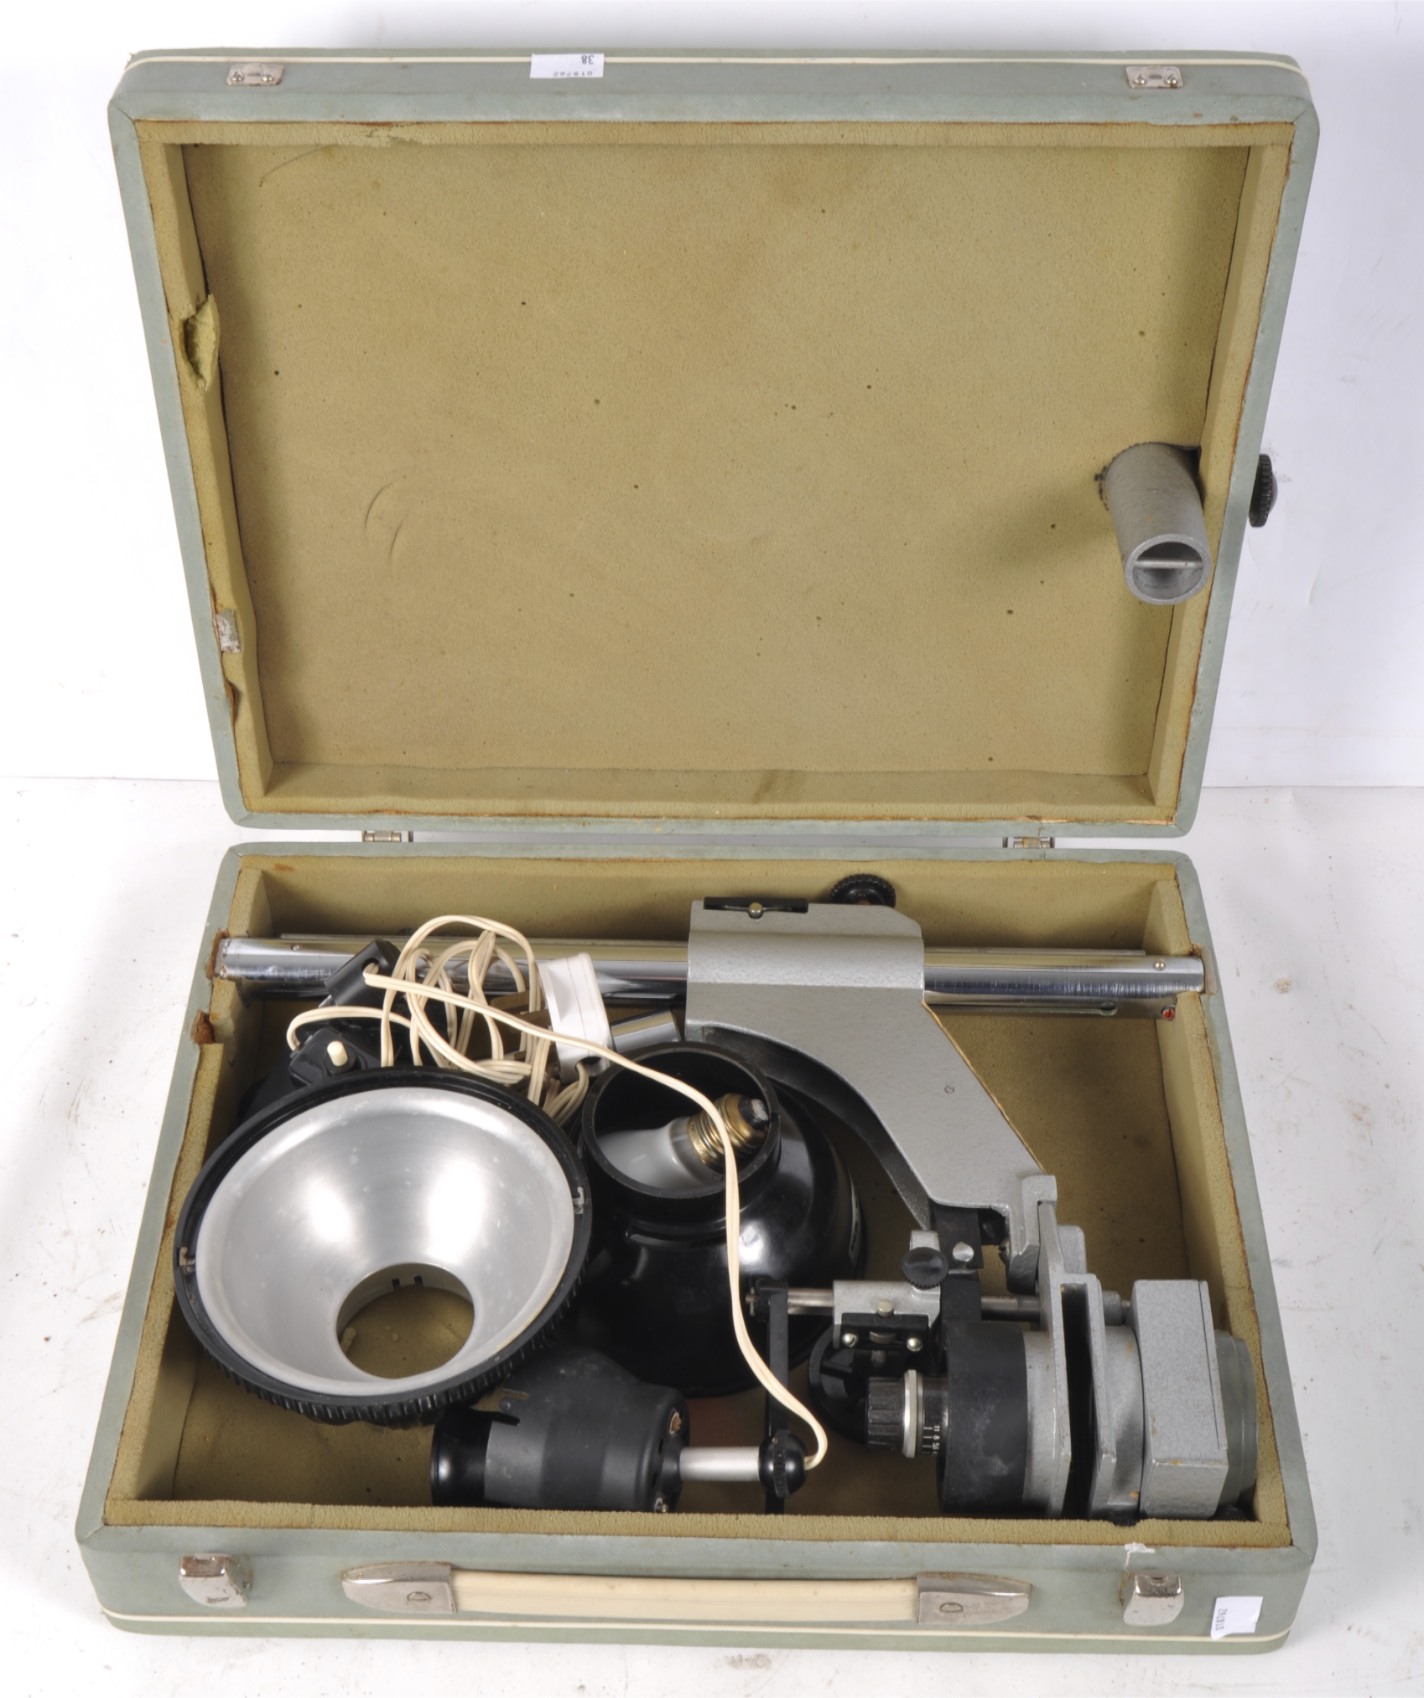 A 1960's portable photographic enlarger, YNA-5.